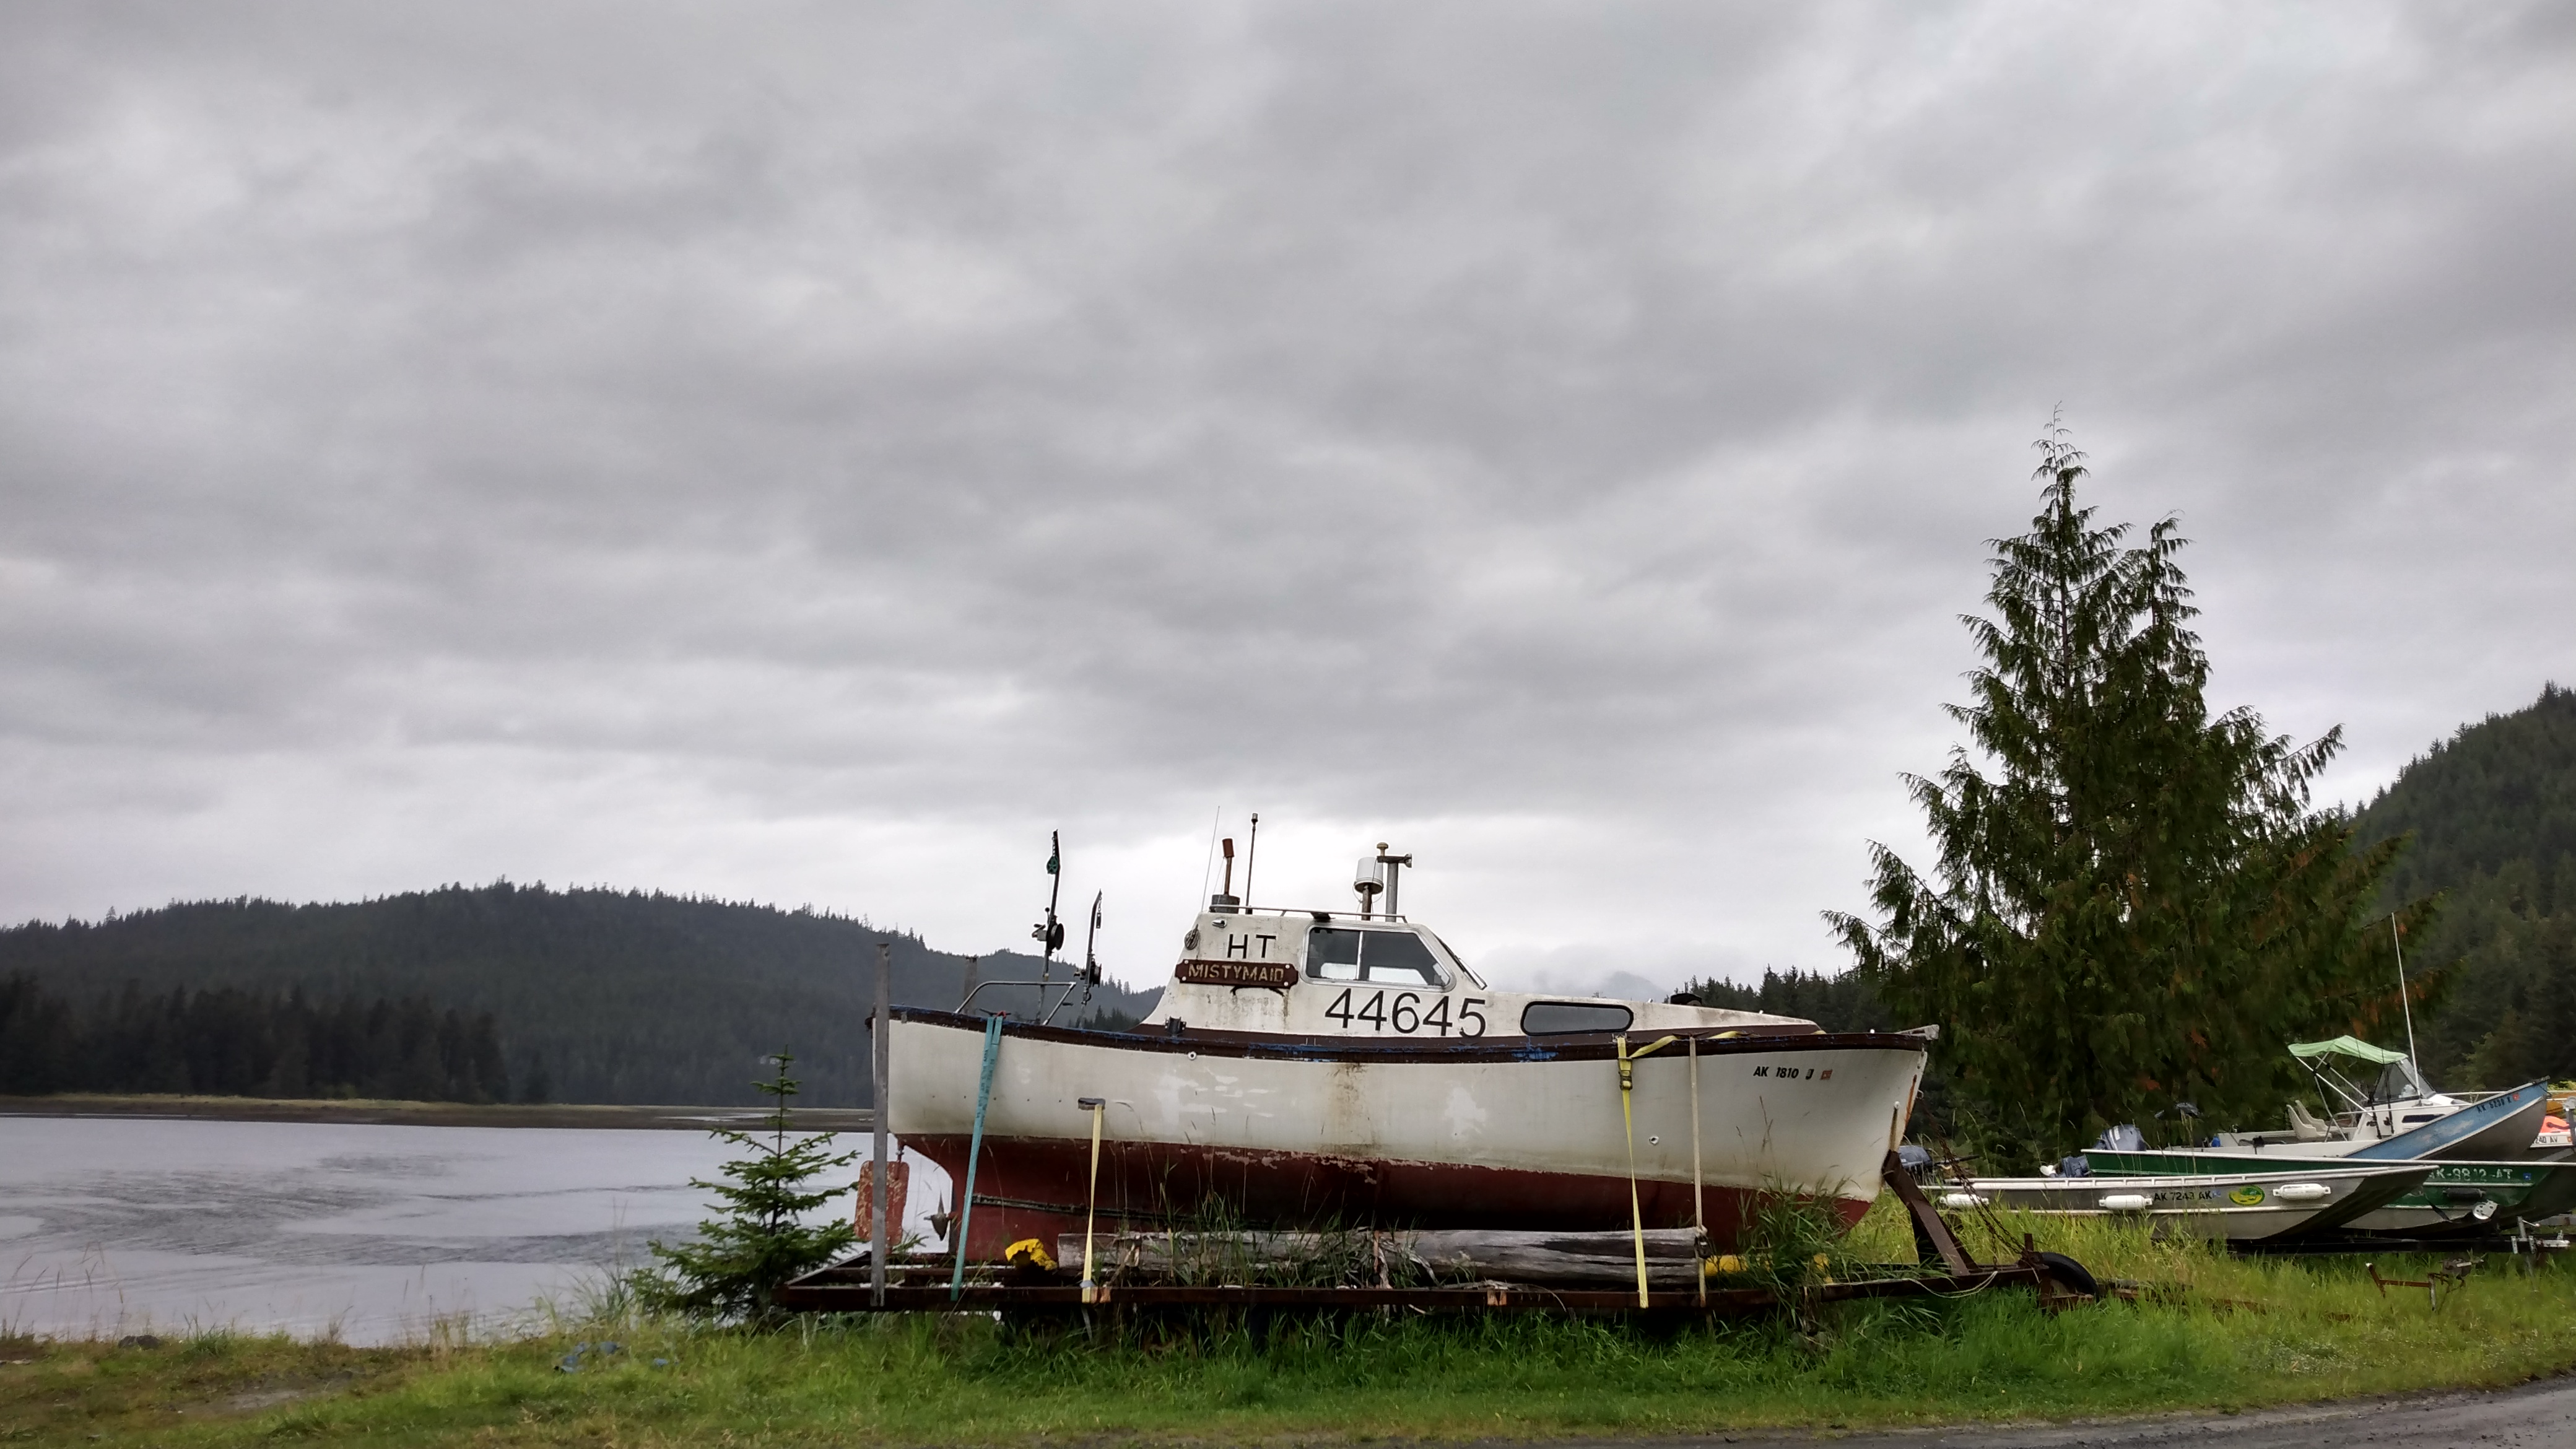 A small, somewhat decrepit-looking sport-fishing boat strapped onto a trailer near the shore, with a tree farther away on the right